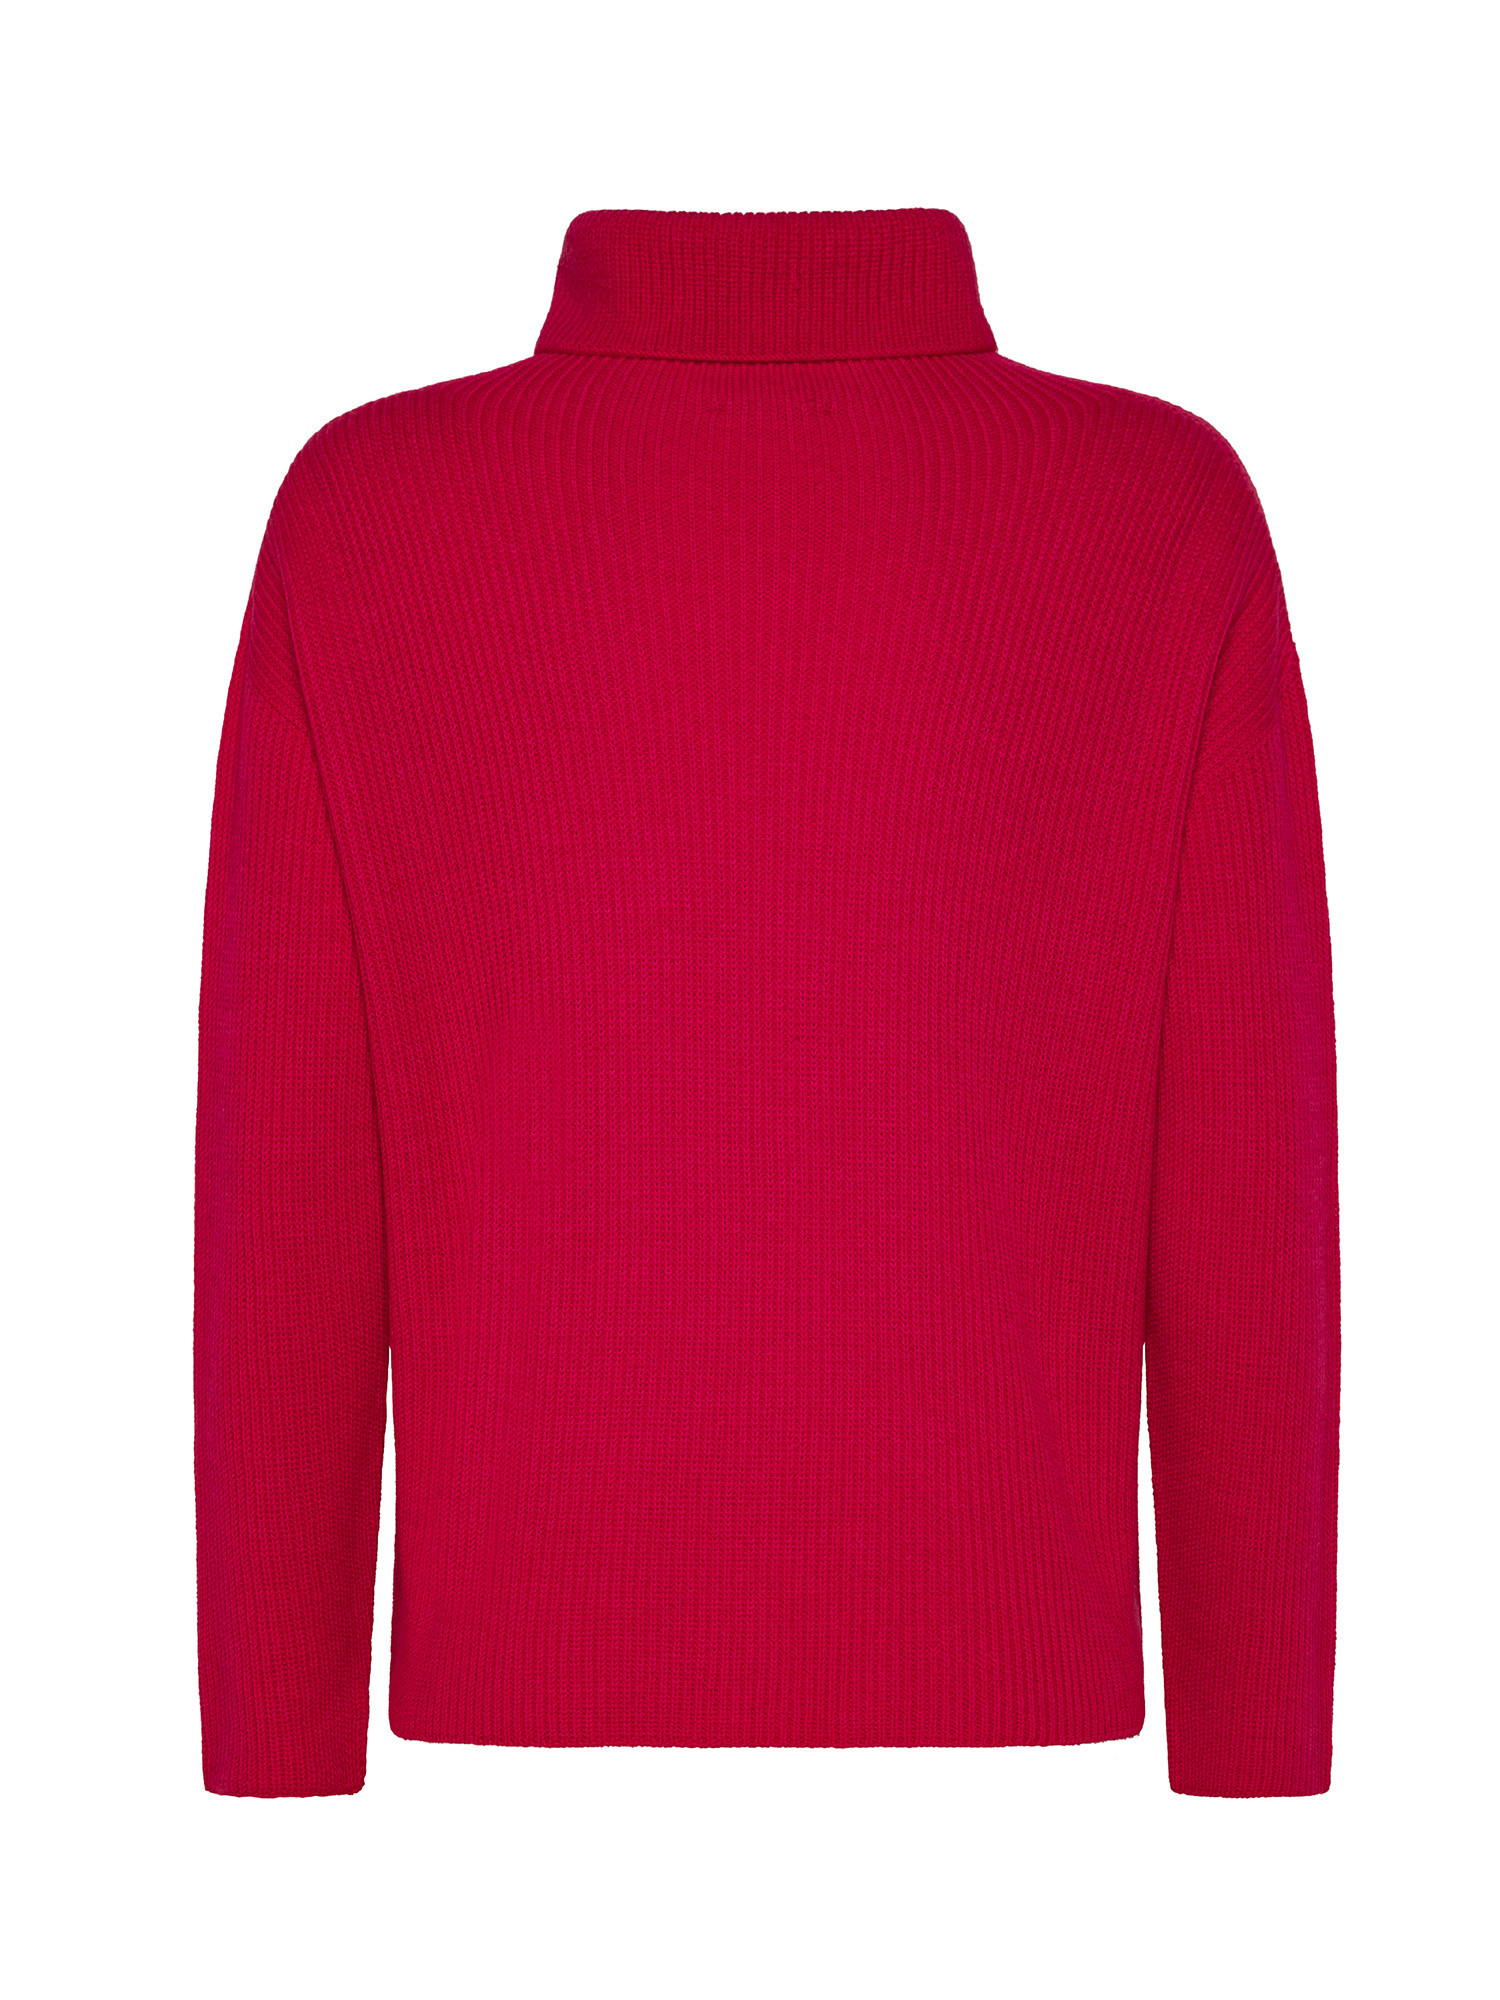 K Collection - Pullover dolcevita in lana extrafine, Rosa fuxia, large image number 1